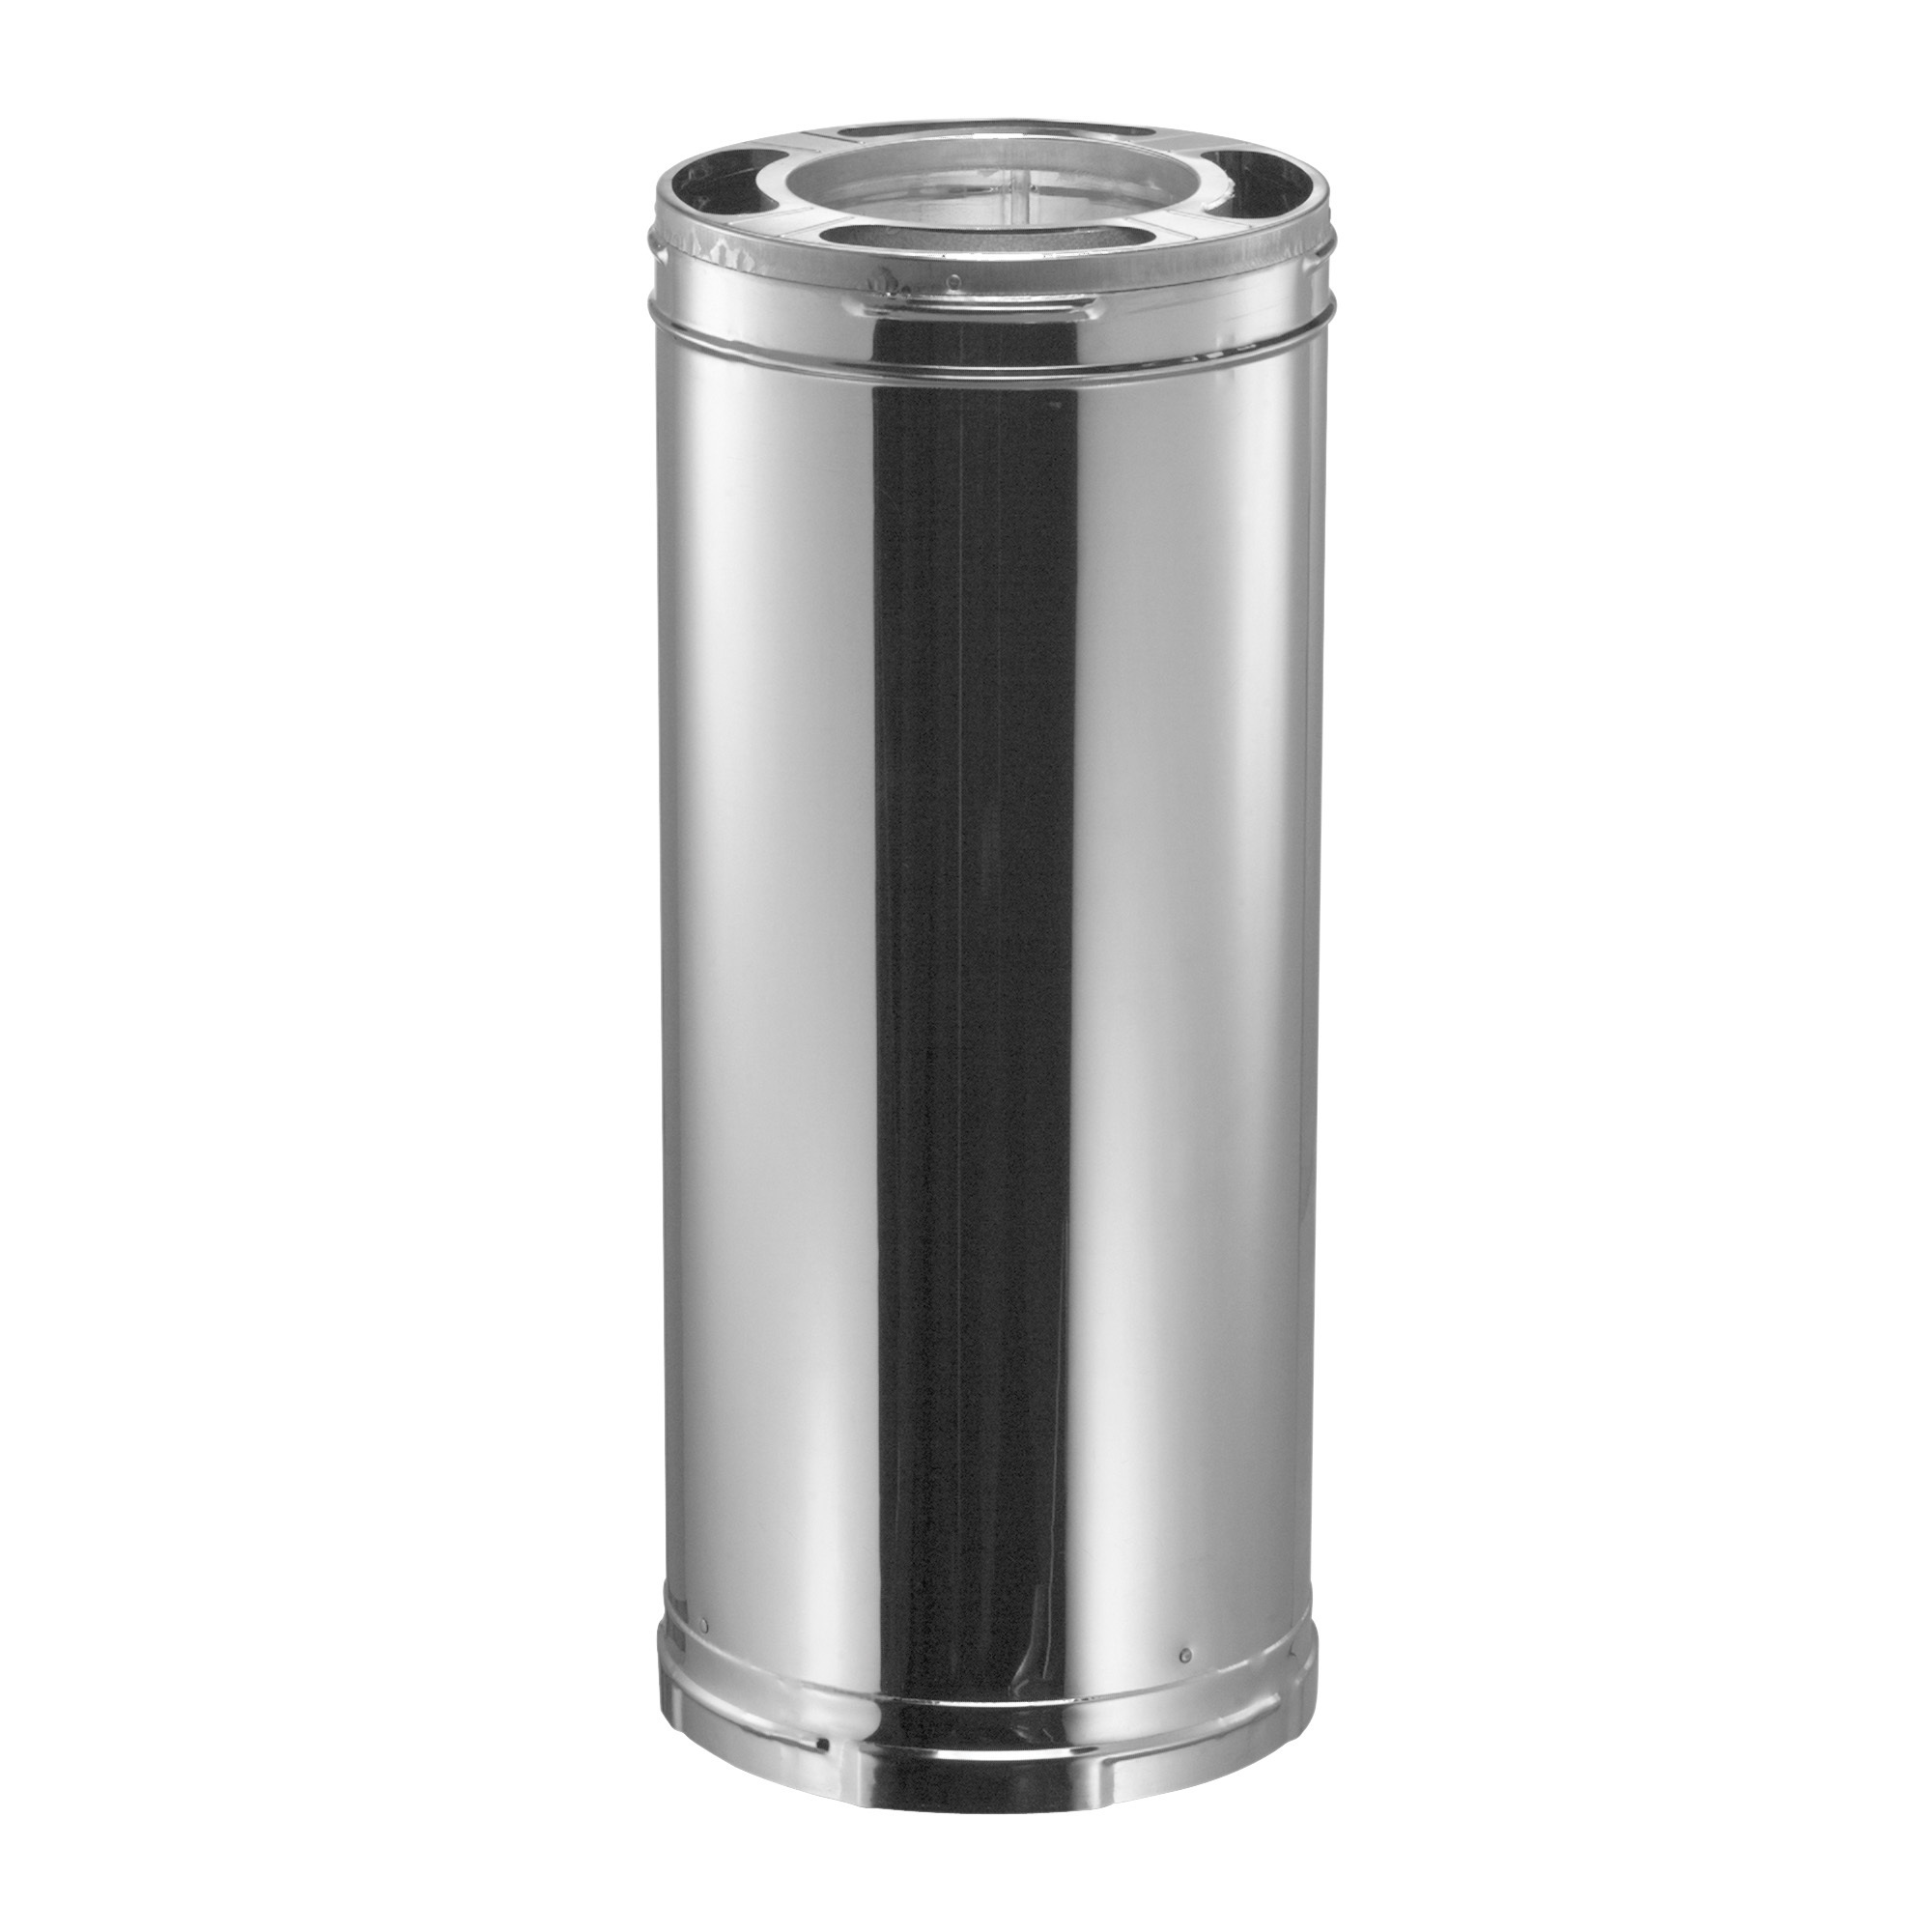 6Inch Diameter 6Inch Length Chimney Pipe, Included (qty.) 1 Material Stainless Steel, Model - DuraVent 6DP-06